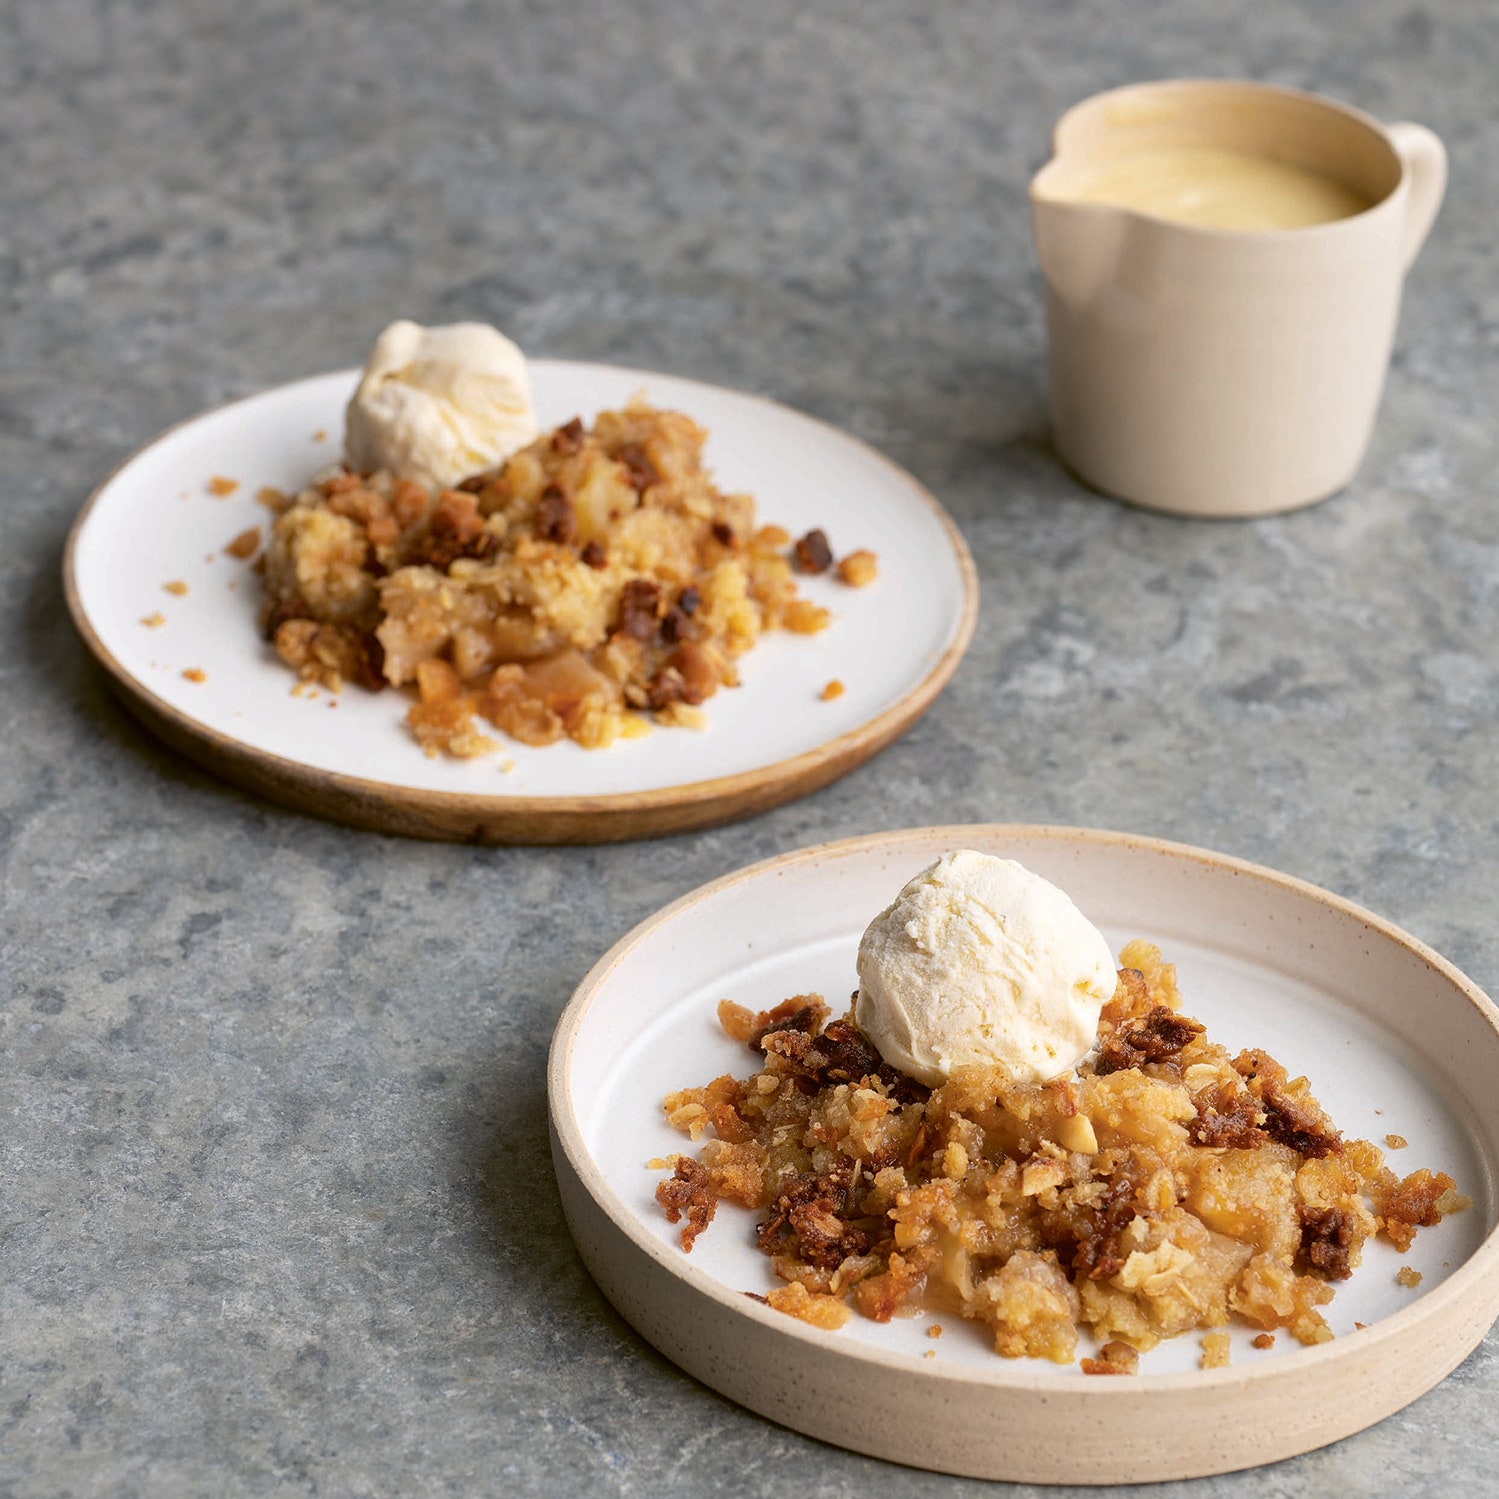 An apple crumble recipe that's just about perfect